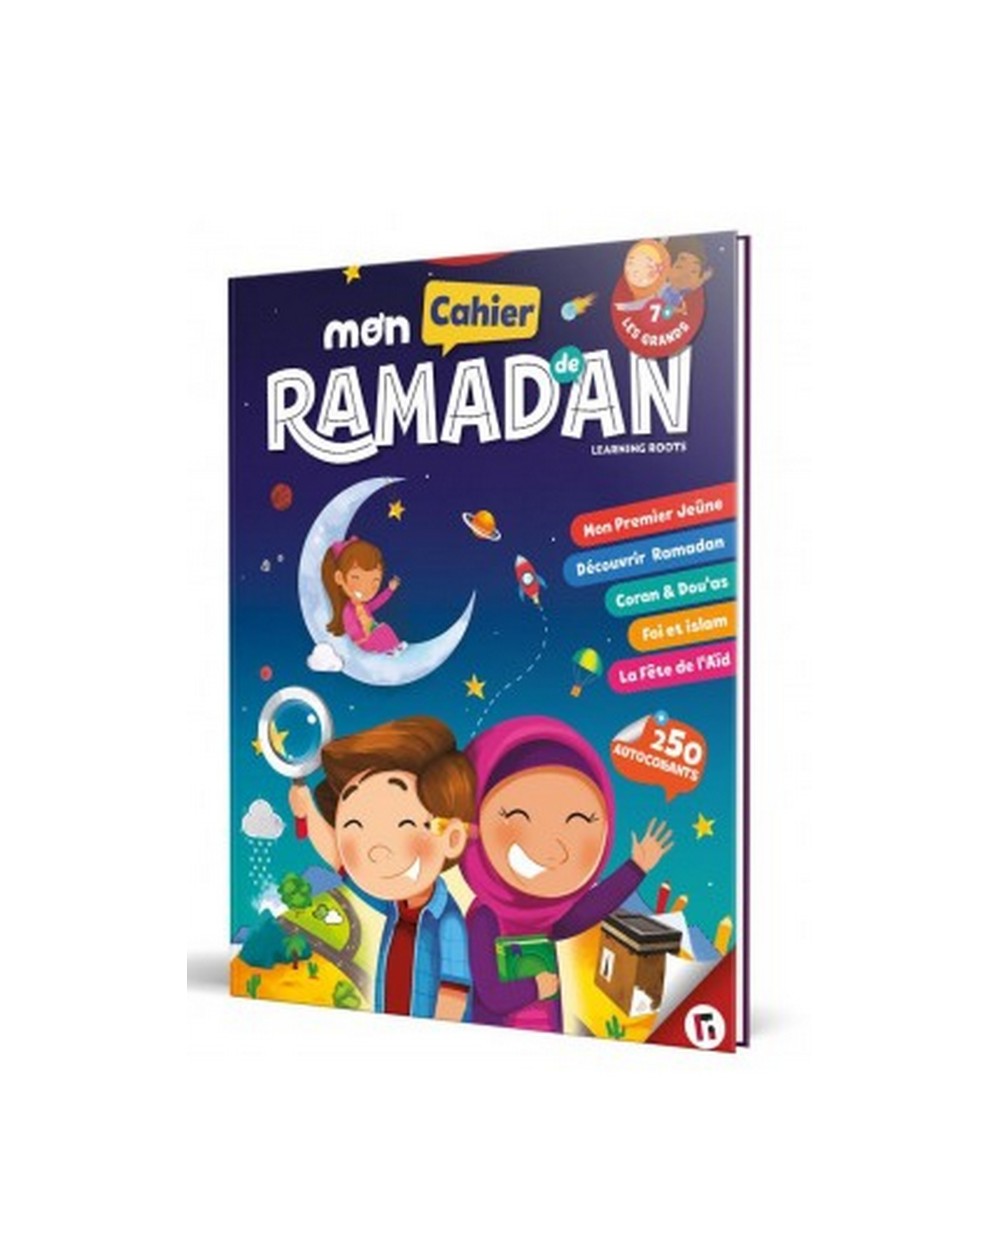 My Ramadan notebook - over 4 years old - Edition Learning Roots